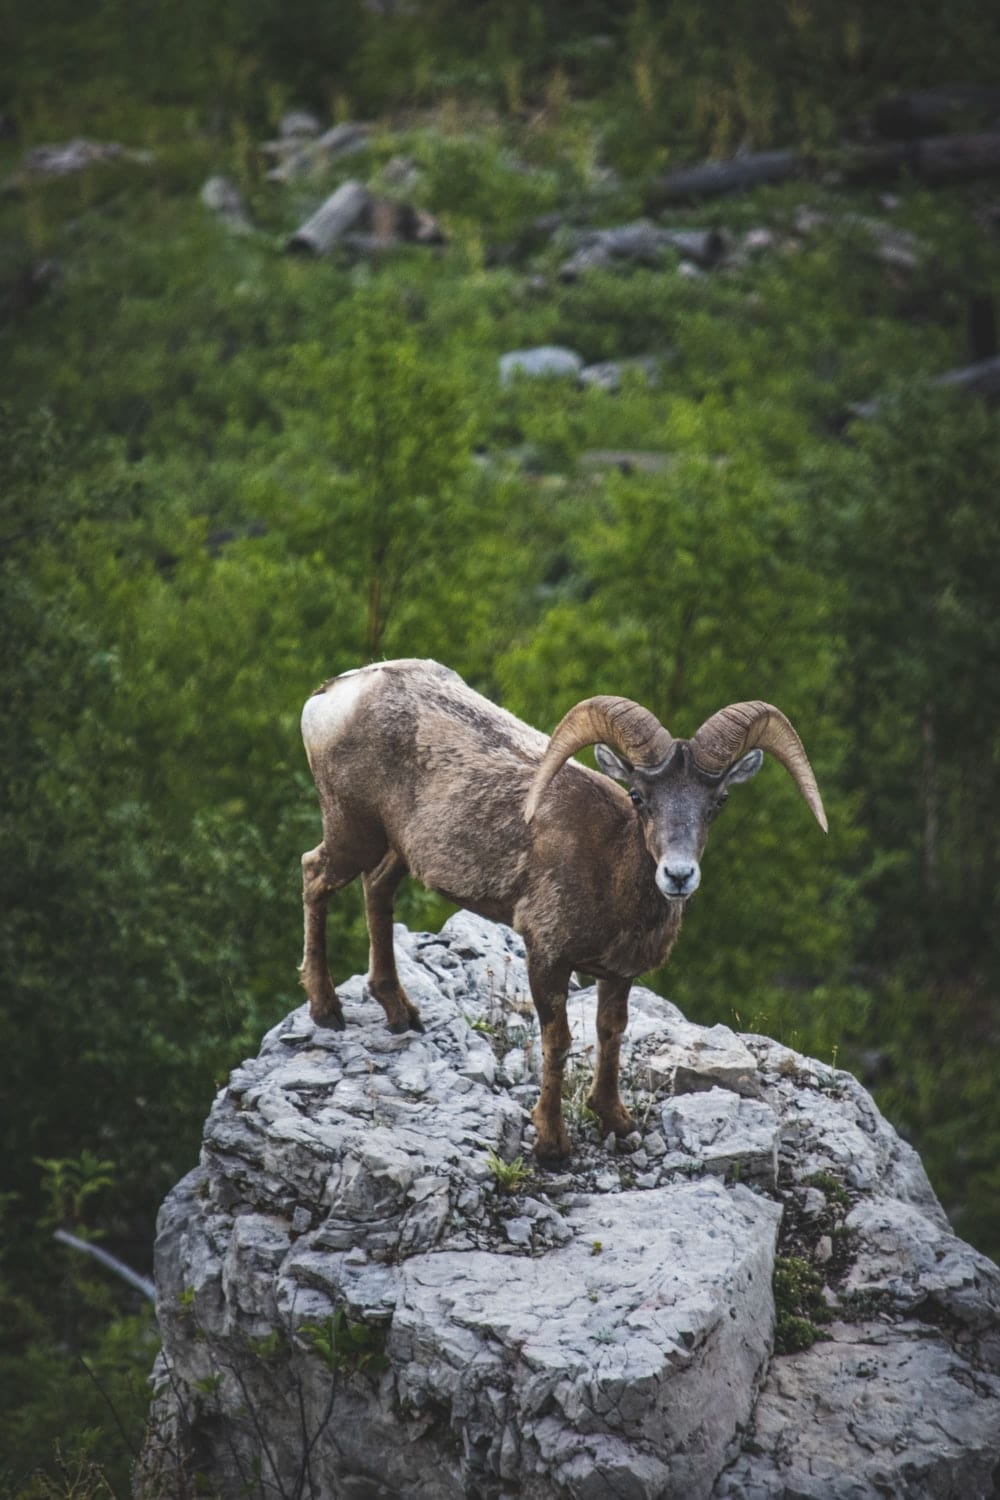 Cross Stitch | Mountain Goat - Brown Ram On Gray Rock During Daytime - Cross Stitched